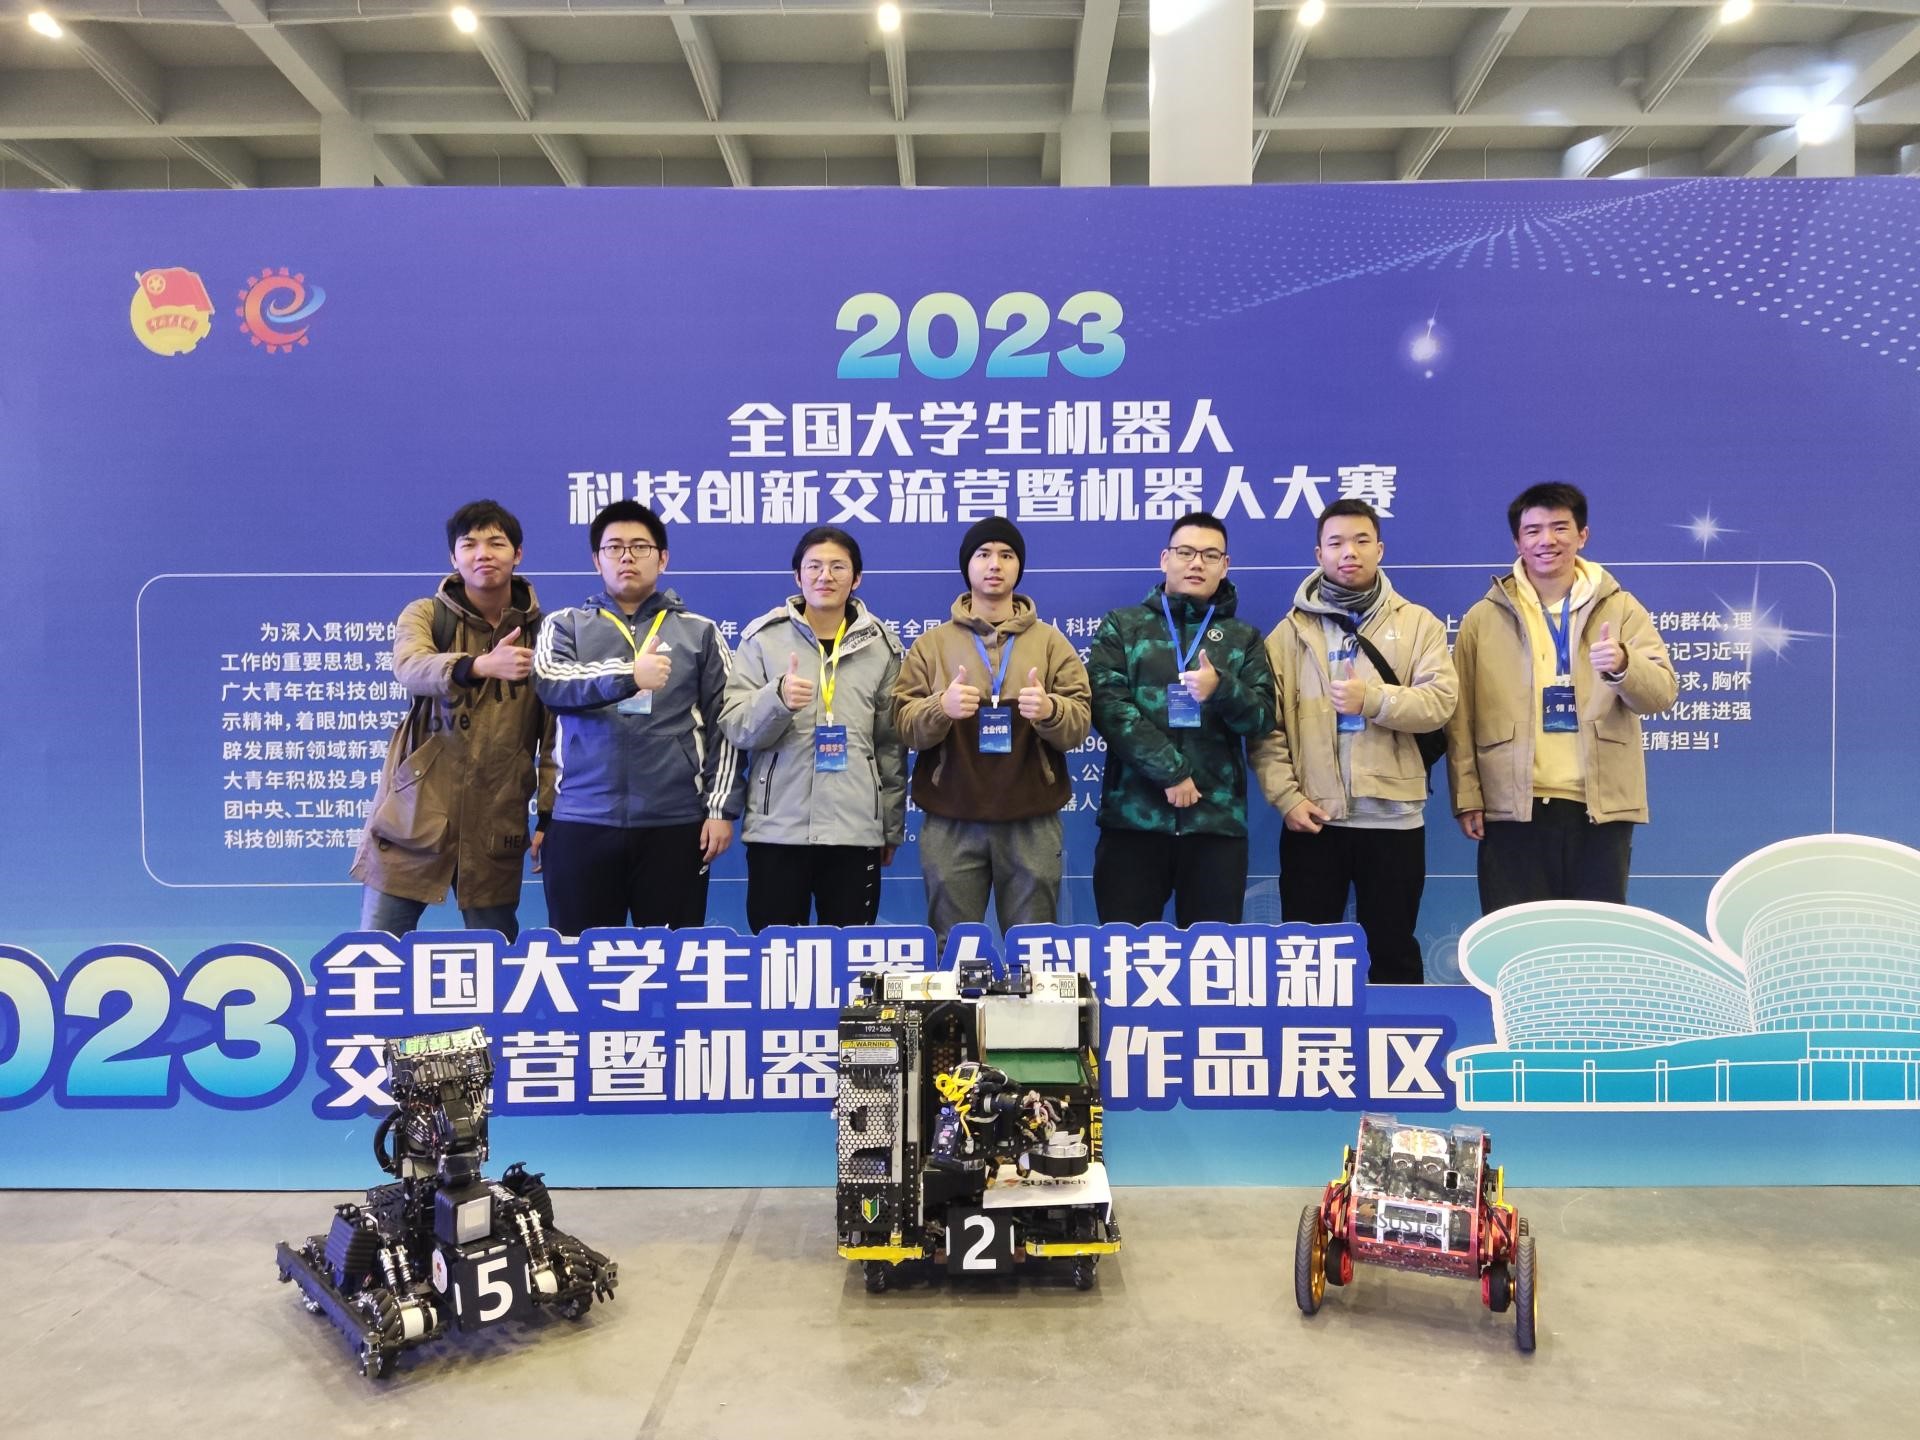 SUSTech students triumph in National Robot Contest